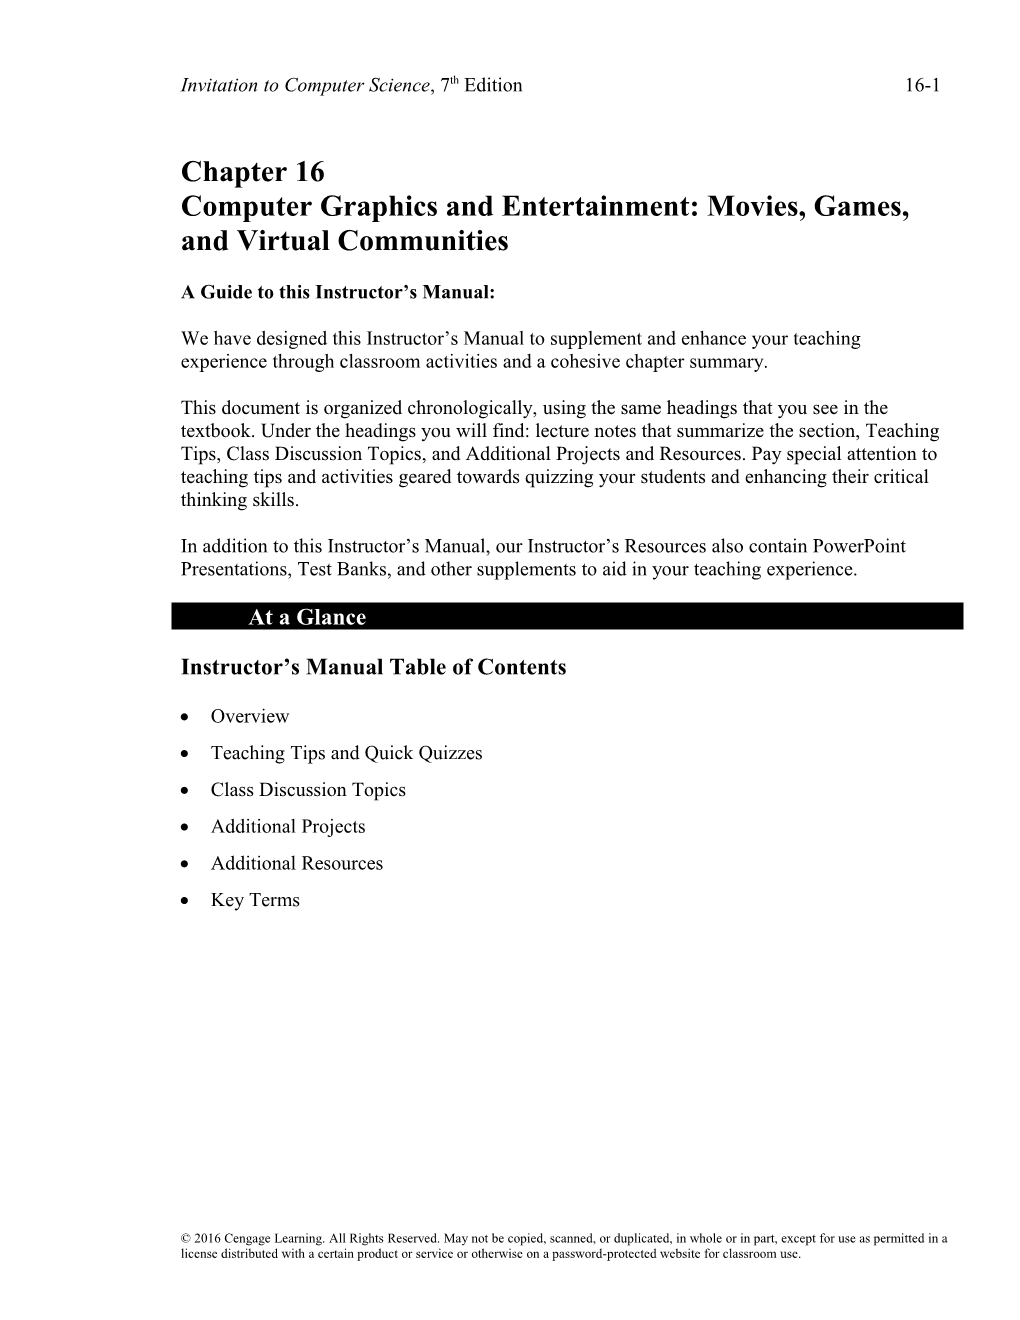 Computer Graphics and Entertainment: Movies, Games, and Virtual Communities